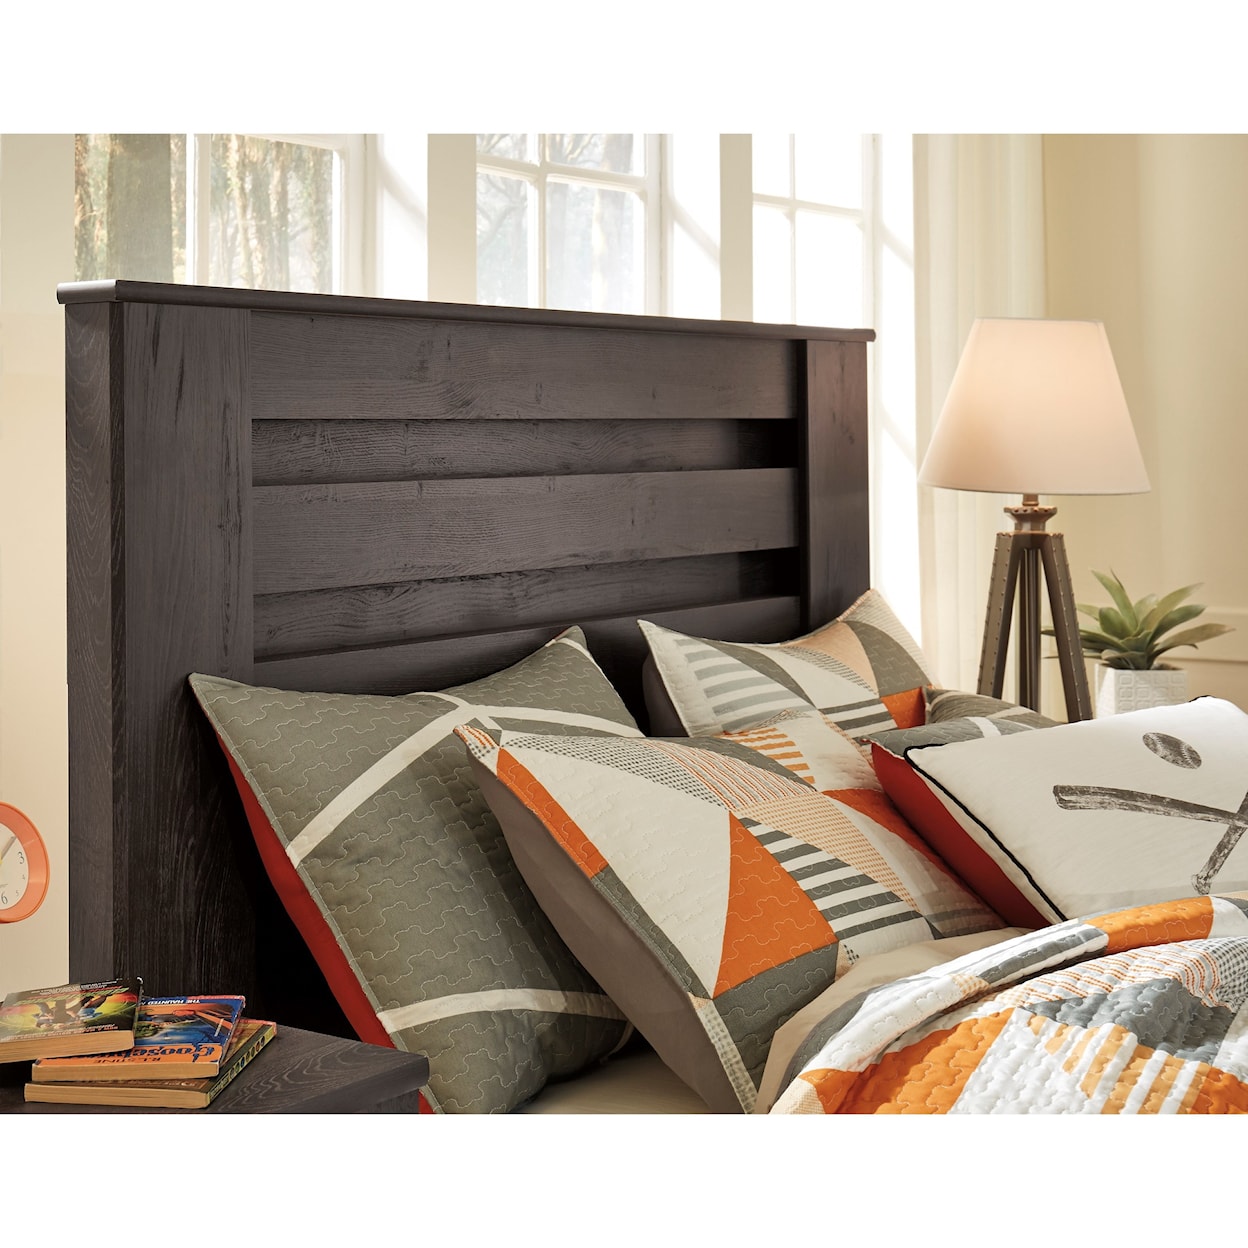 Signature Design by Ashley Furniture Brinxton Full Panel Bed